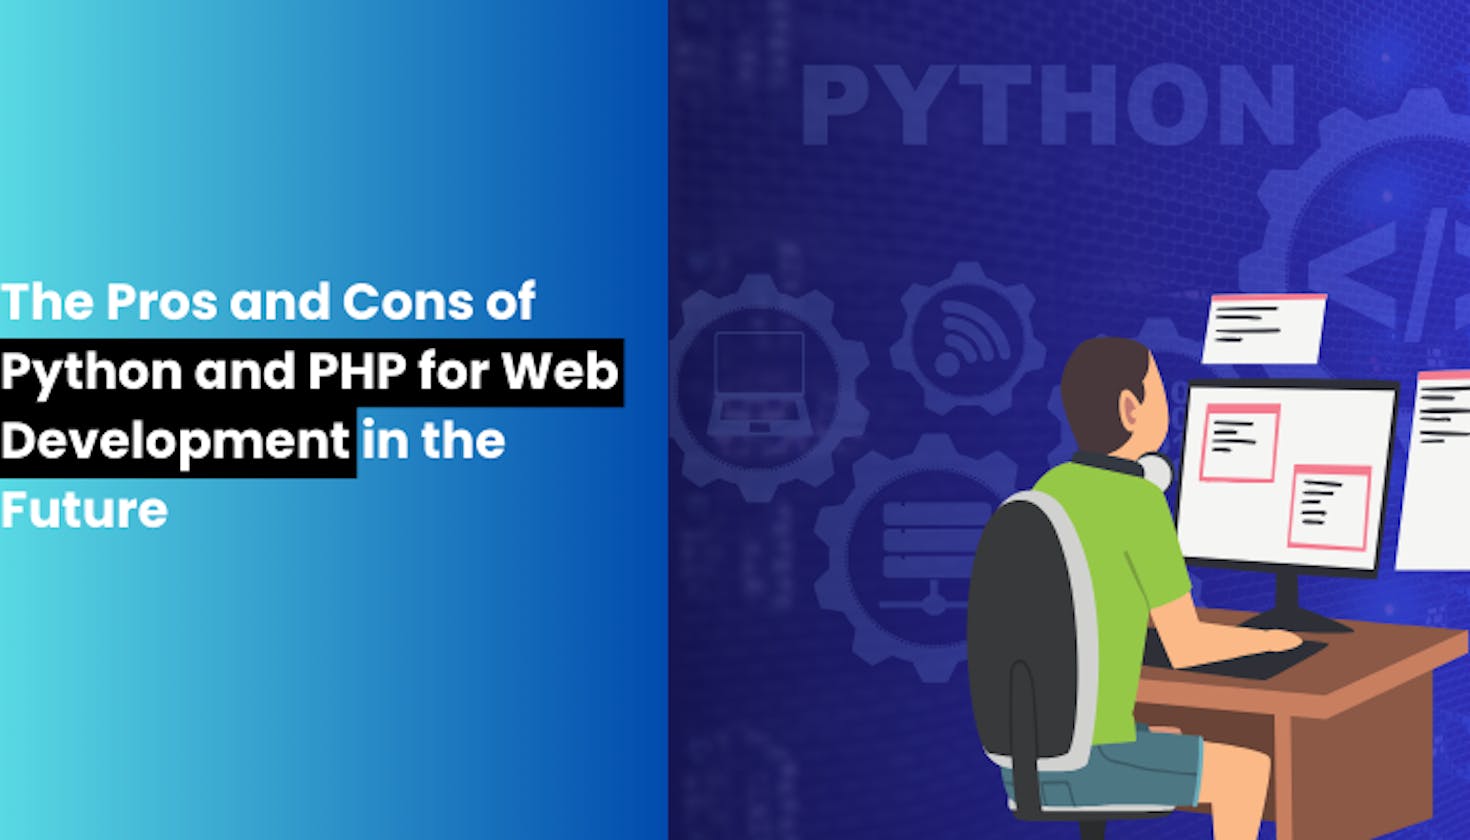 The Pros and Cons of Python and PHP for Web Development in the Future